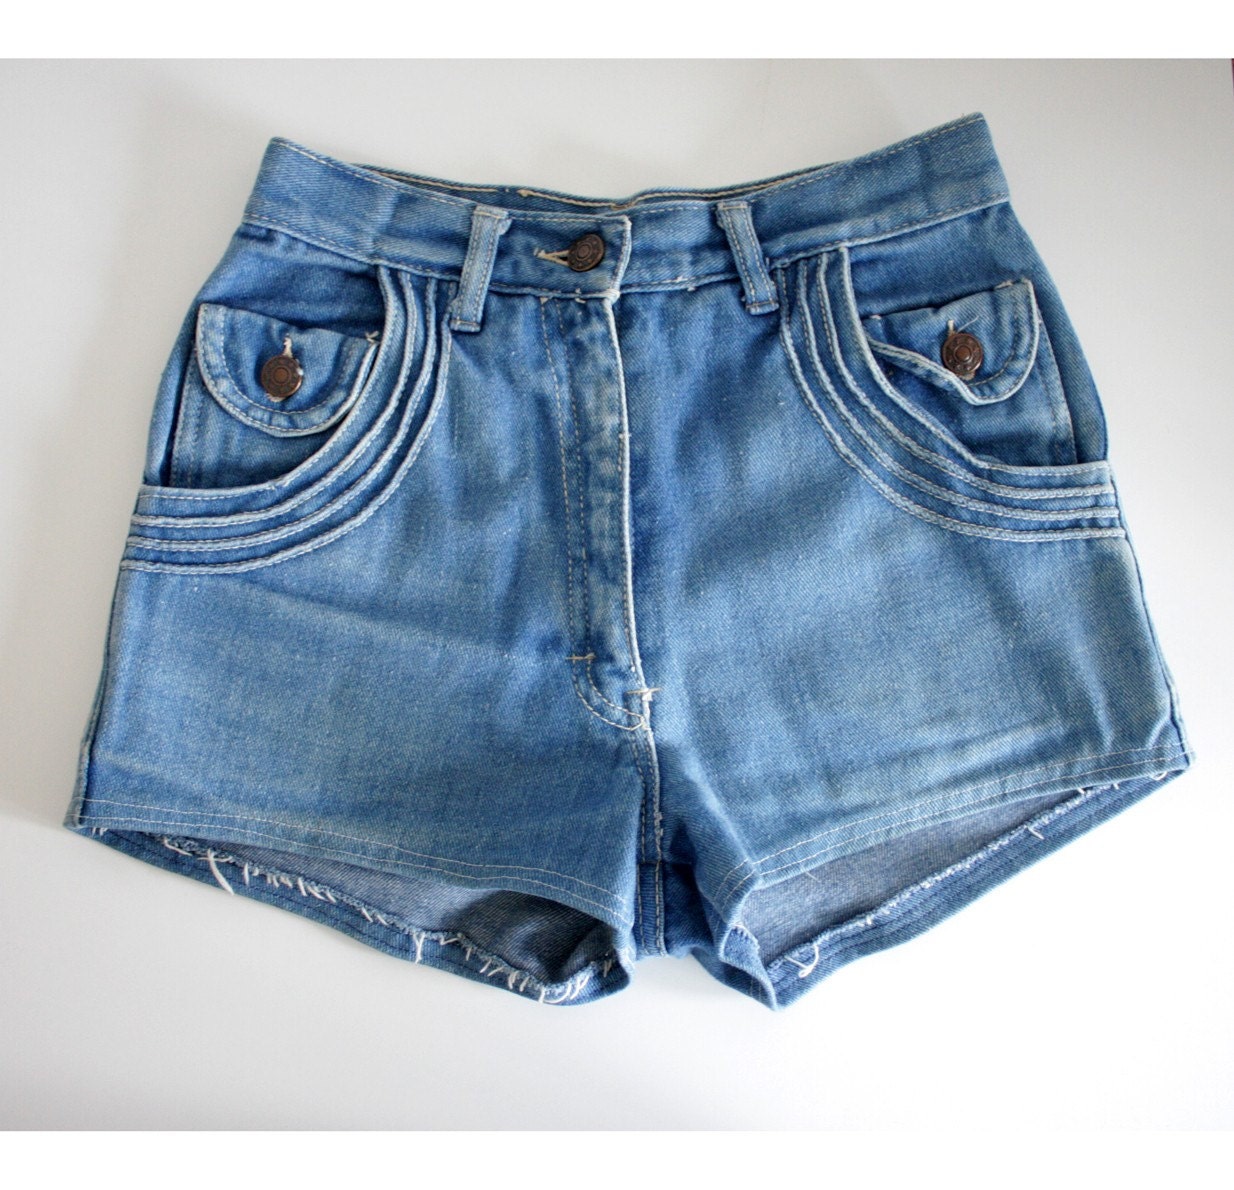 Vintage 70s high waisted jean shorts xs s by nemres on Etsy